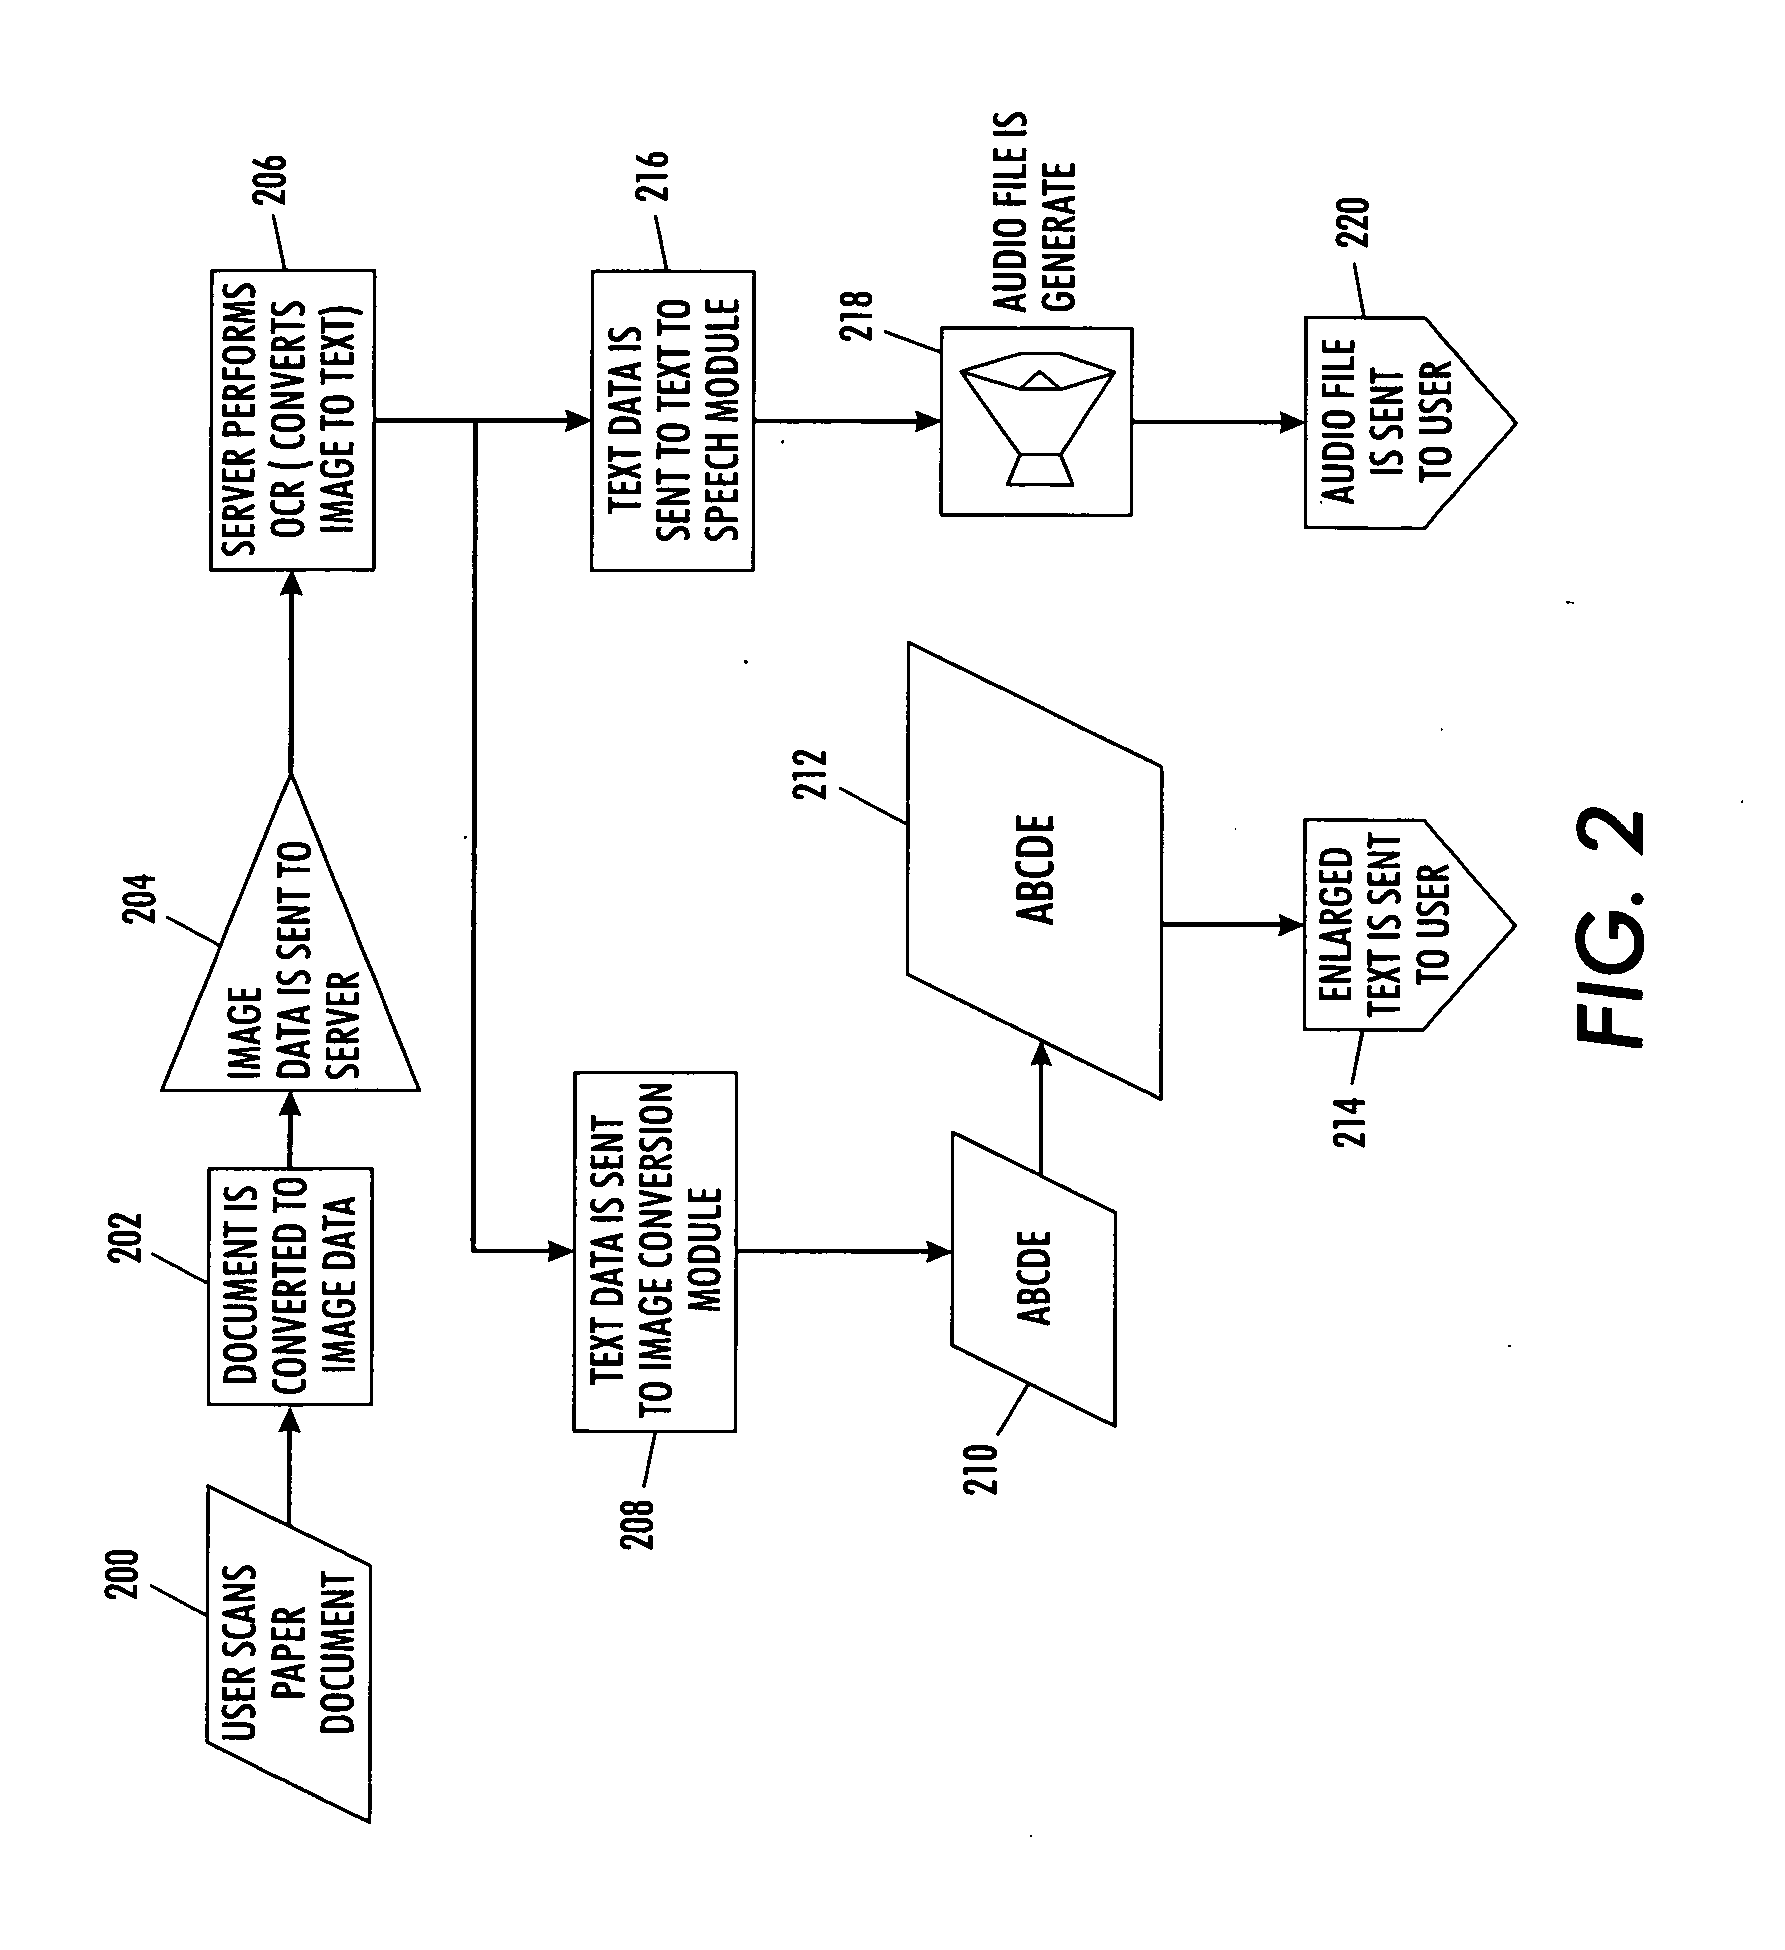 Systems and methods for the visually impared